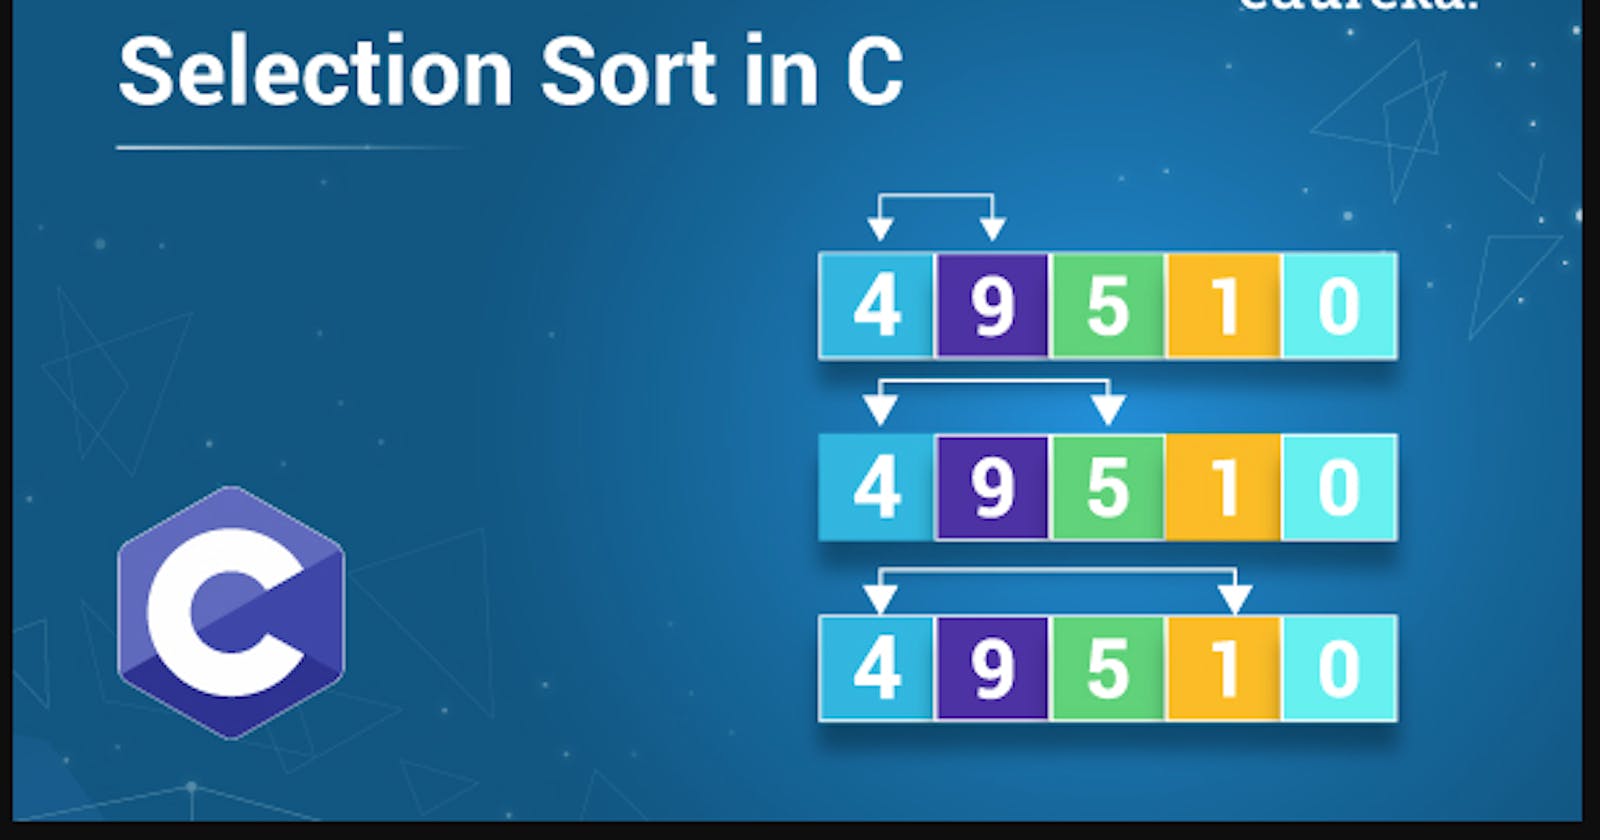 Selection Sort in C: How to implement Selection Sort in C